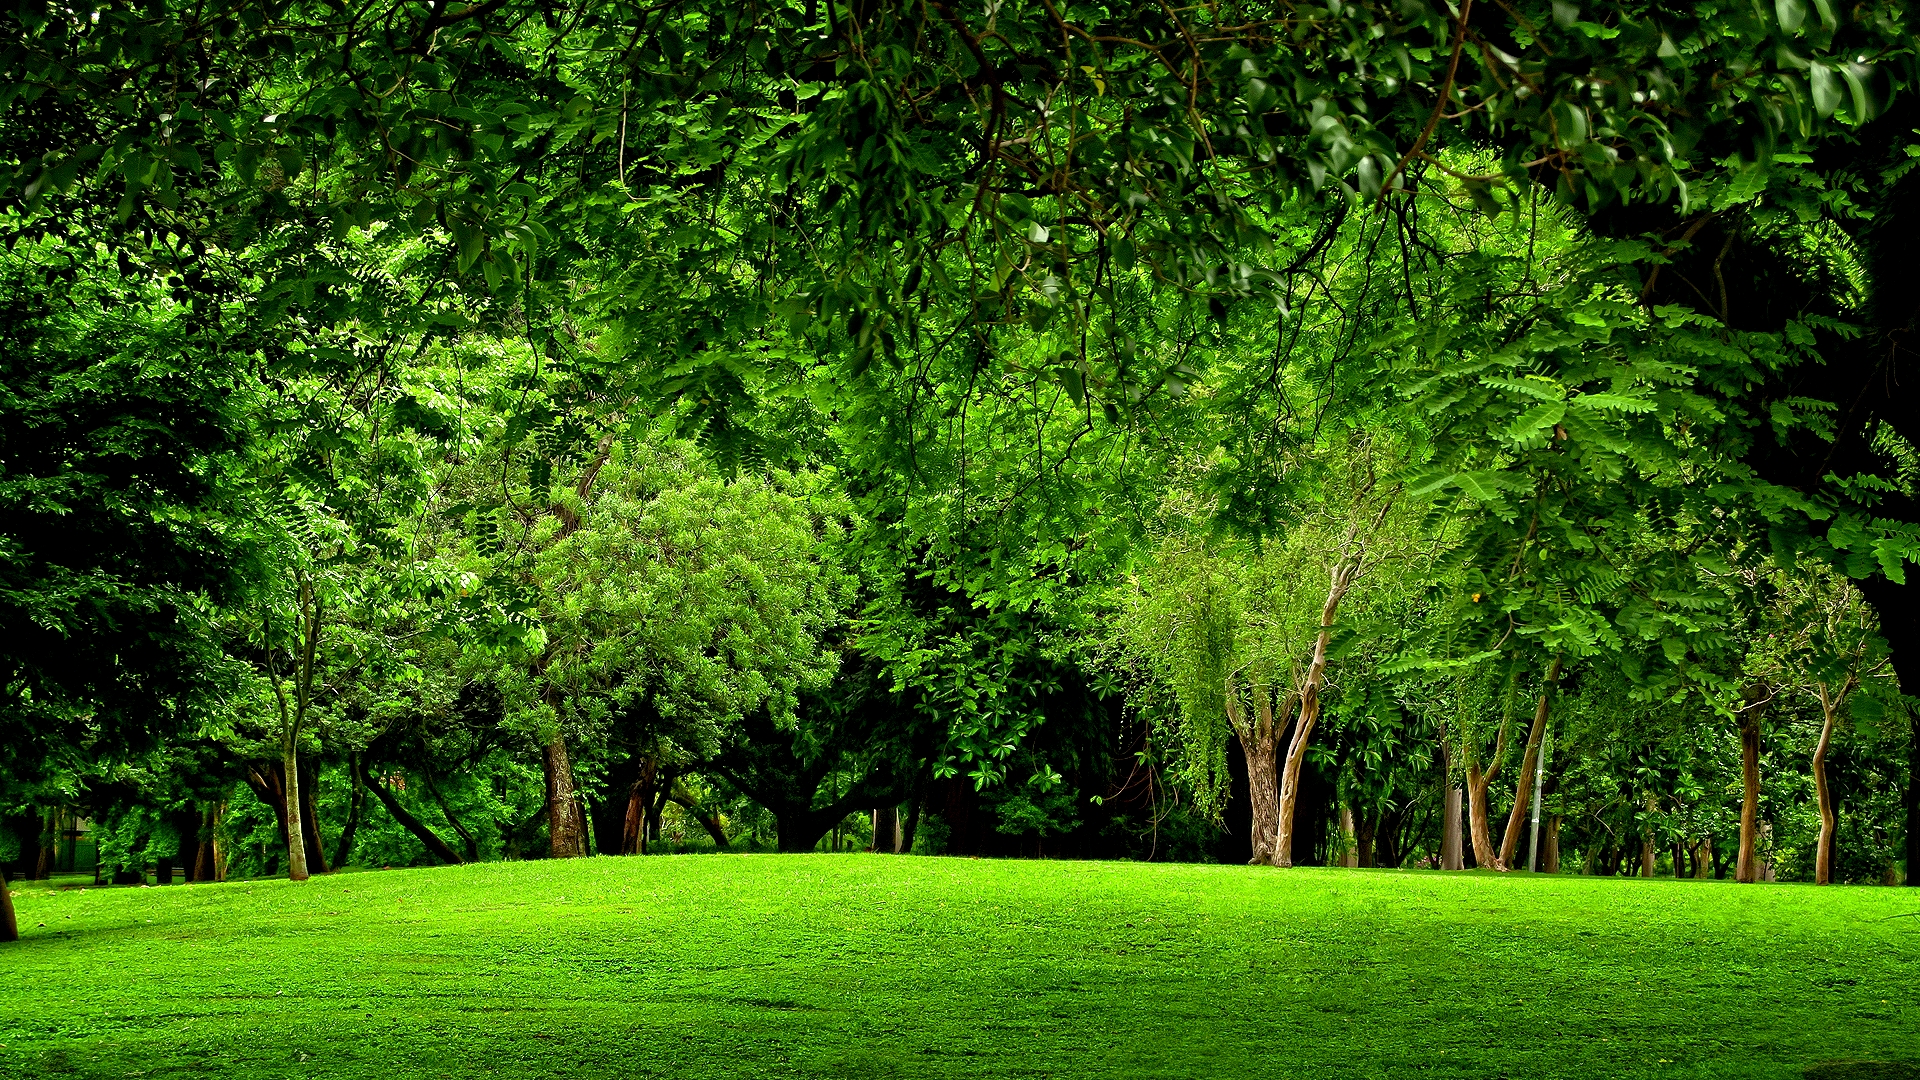 Green Forest HD Wallpaper Background Image 1920x1080 1920x1080